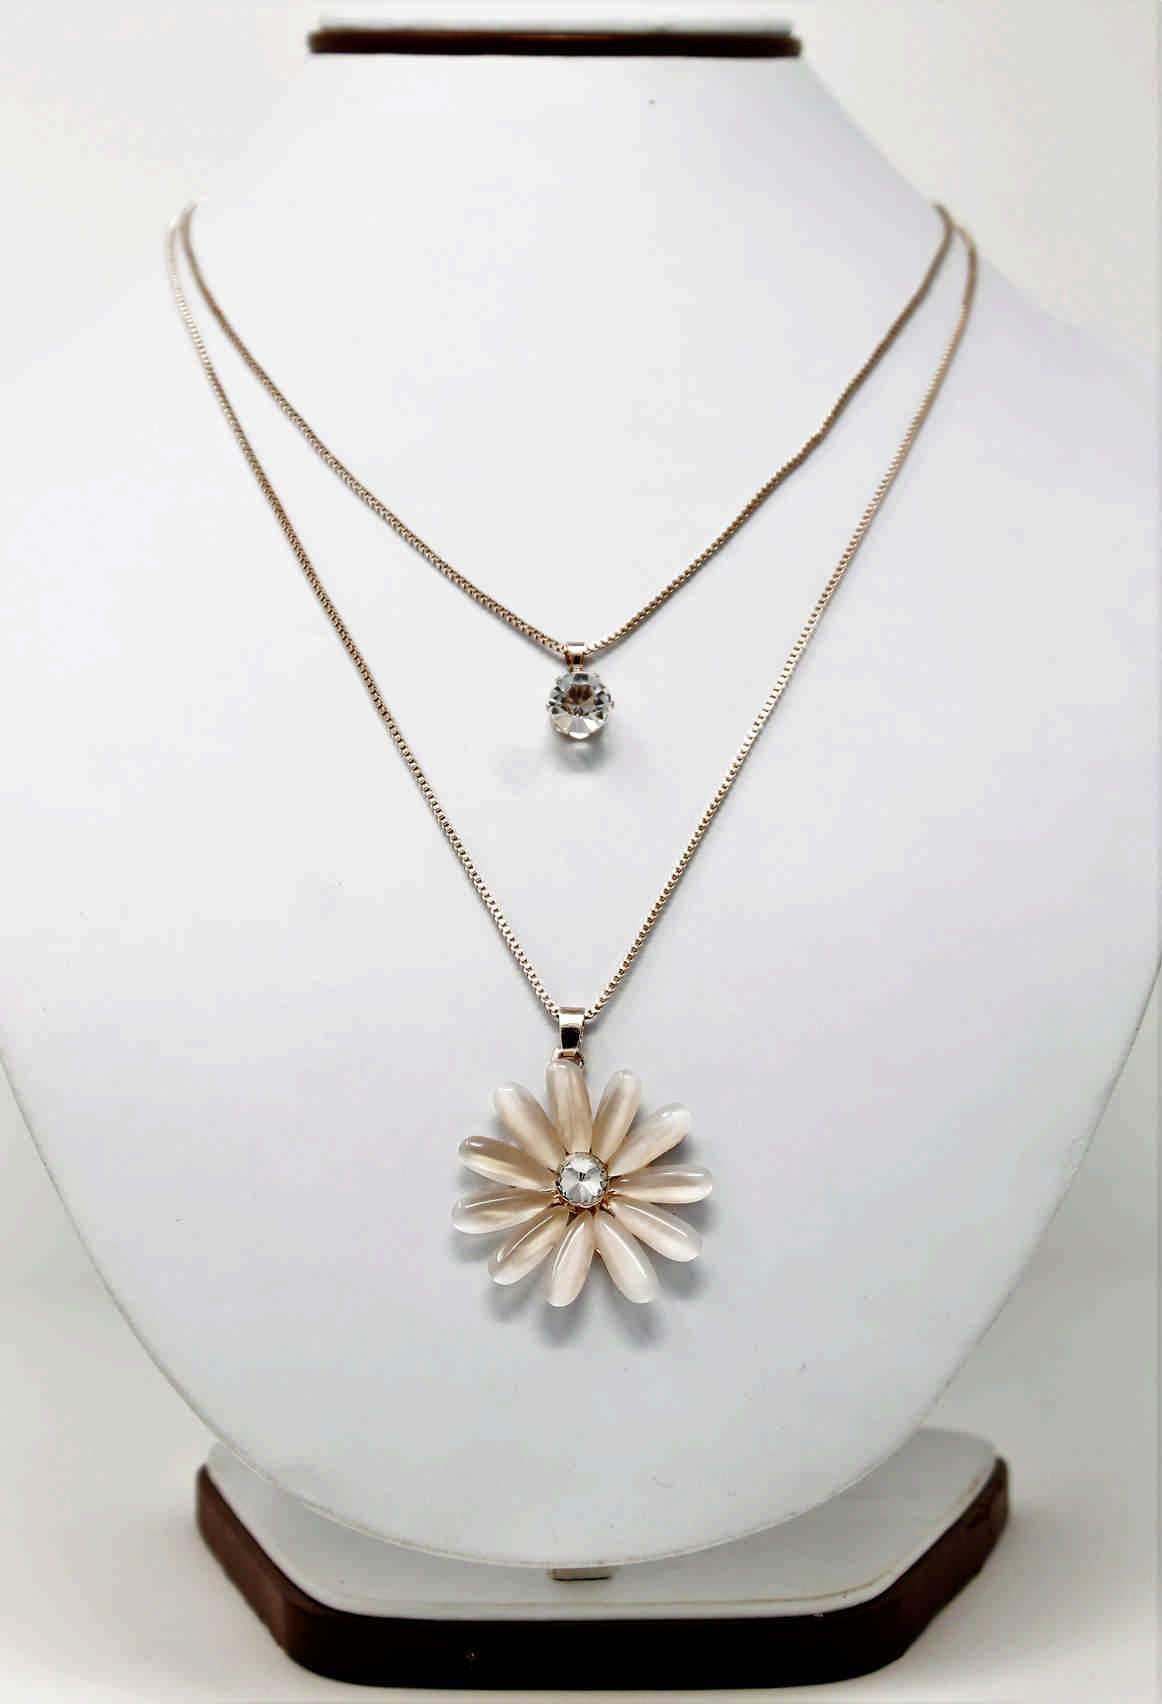 Rhinestones Studded Floral Design Imitation Fashion Metal Double Pendant with Long Chain for Girls